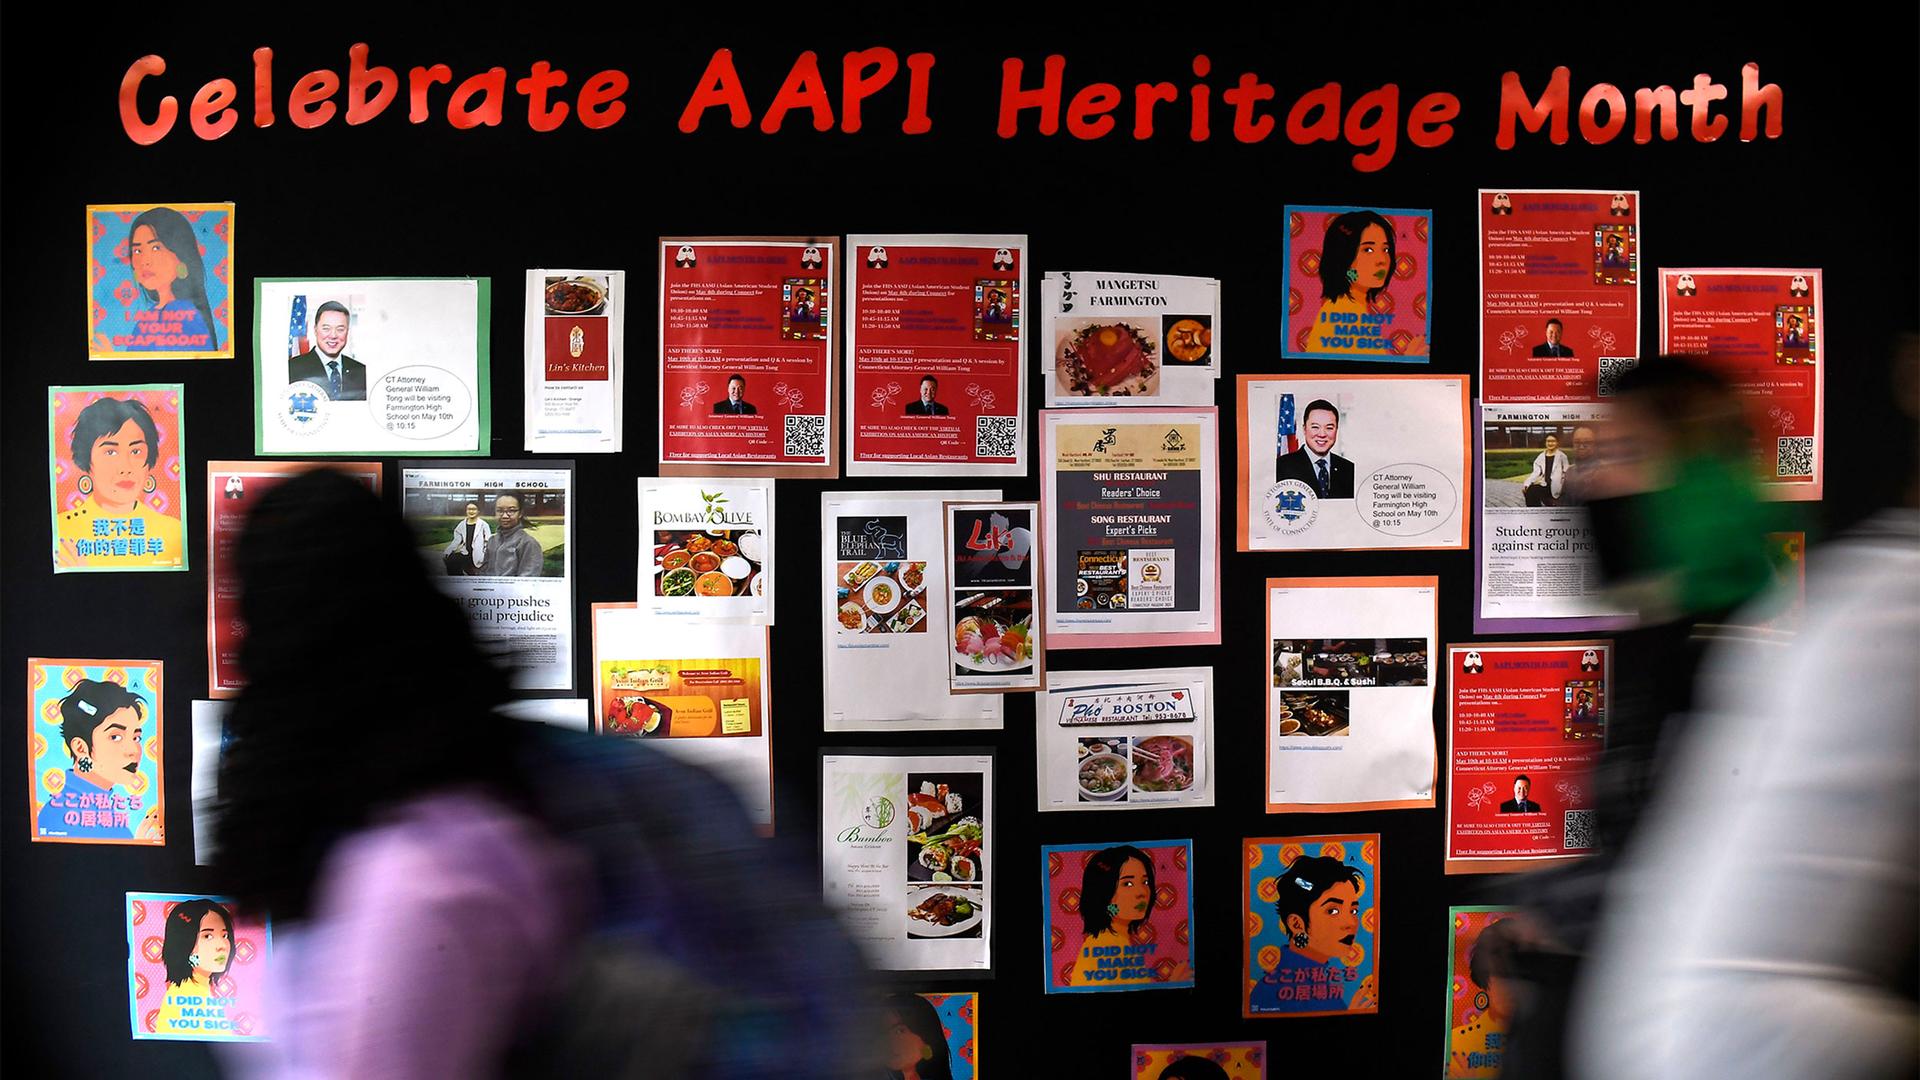 People walk past a board full of pictures celebrating AAPI heritage month